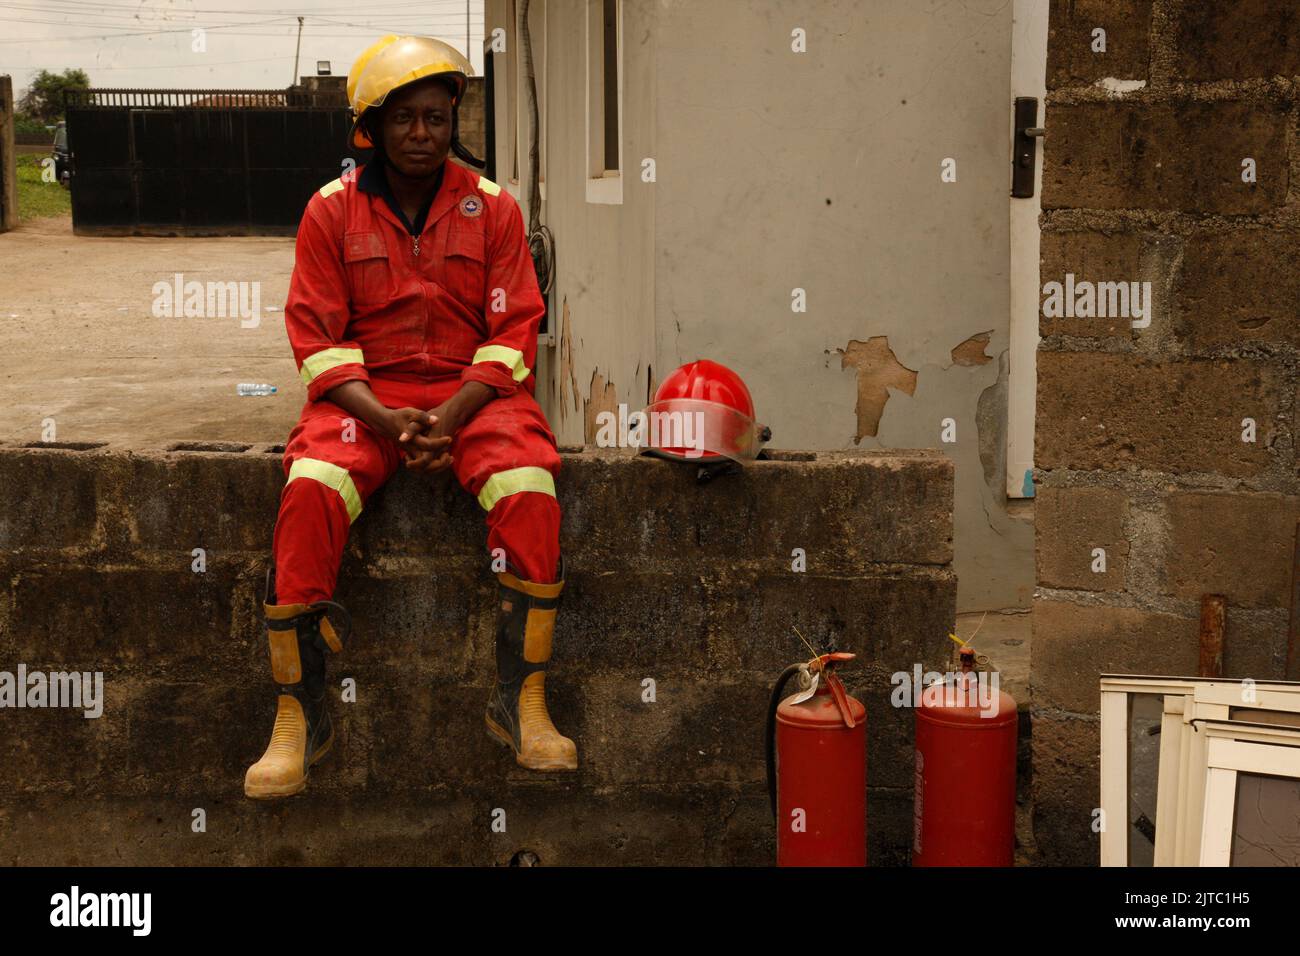 Ogun State, Nigeria. 29th August 2022. A fire fighter taking a rest after a gas explosion at a plant near the Redeemed Christian Church of God (Redemption Camp) along the Lagos-Ibadan Expressway, Ogun State, Nigeria. Stock Photo